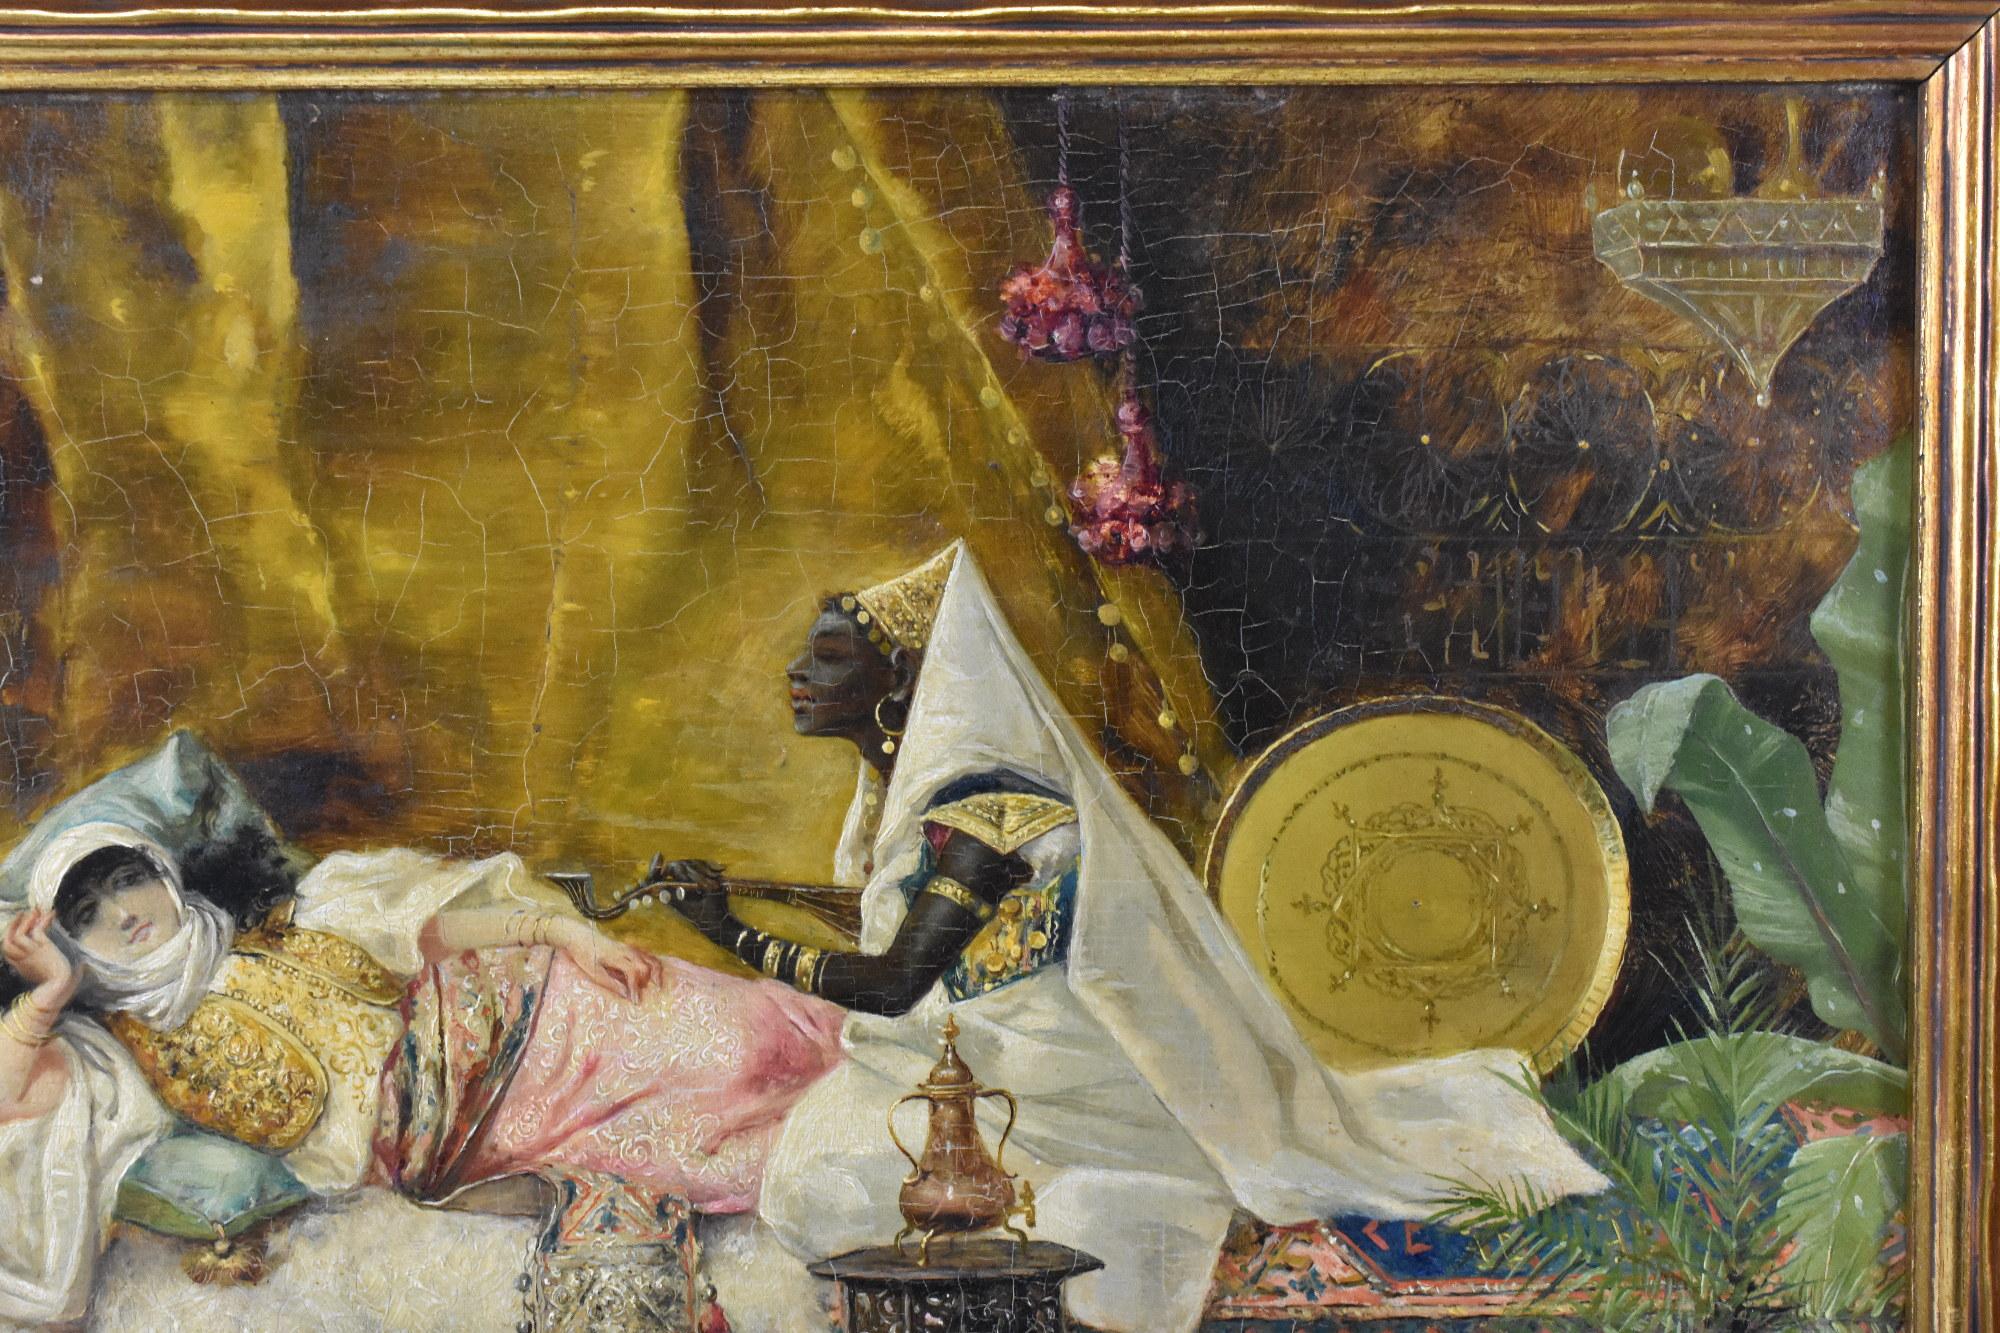 Painted Antonio Rivas Oil Painting on Board, 2 Musician's Serenading a Reclining Woman For Sale